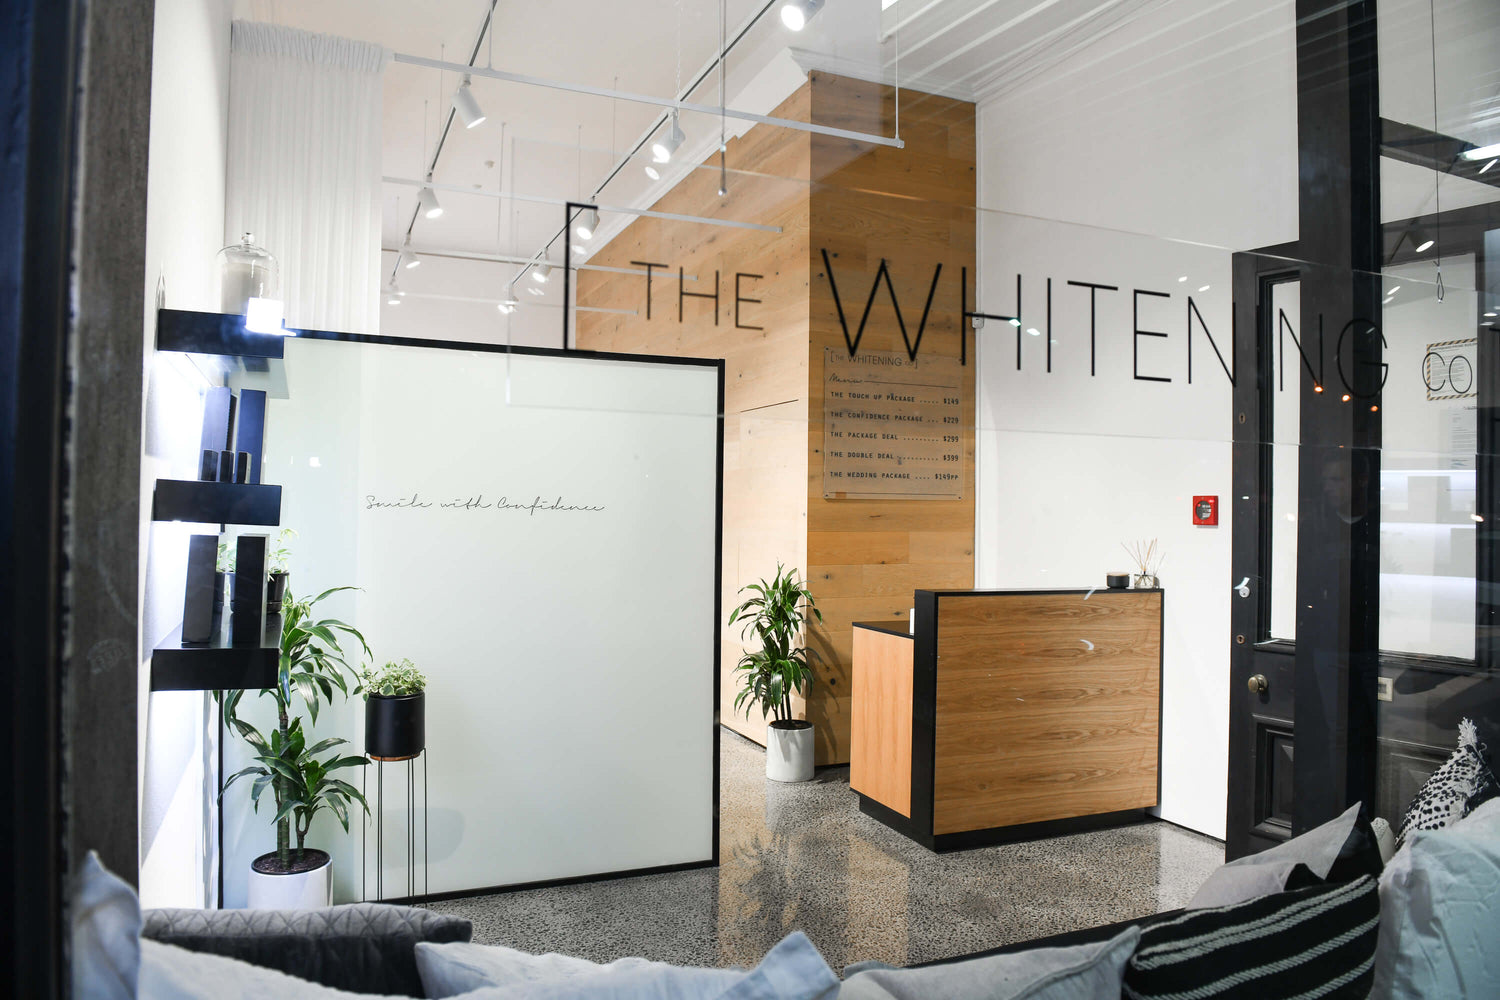 Introducing - The Whitening Co Eden Terrace